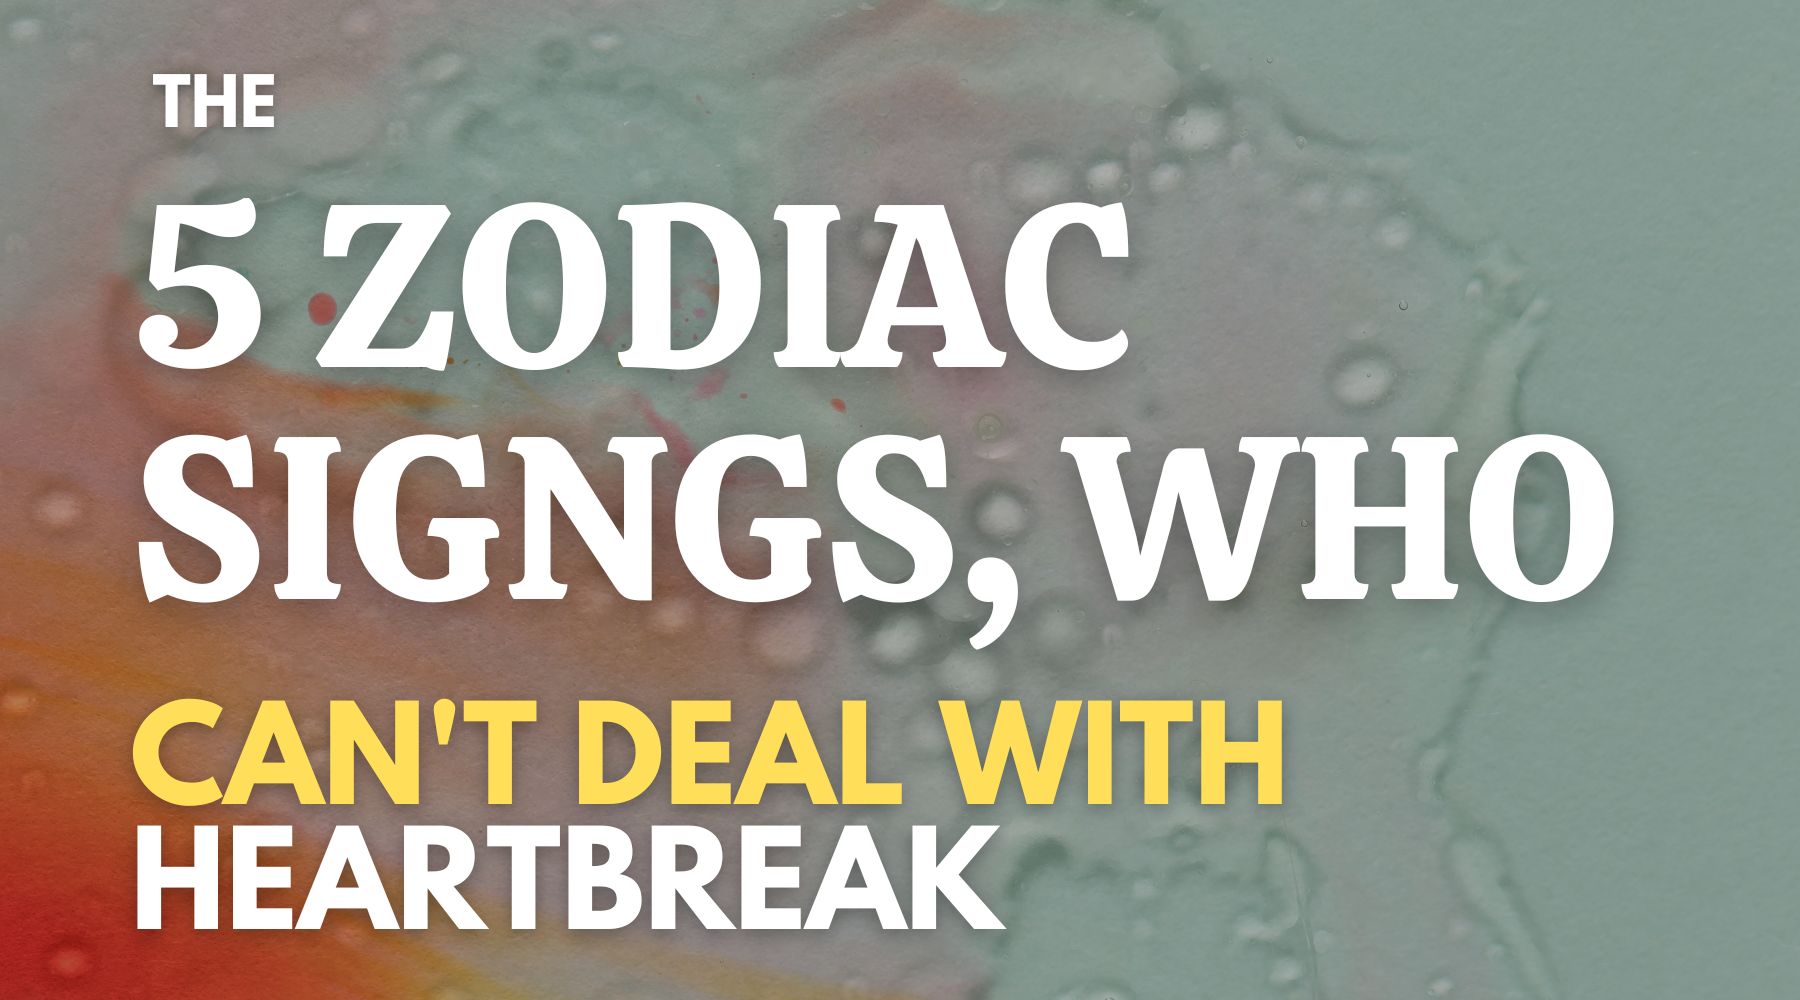 The 5 zodiac signs, who can't handle heartbreak